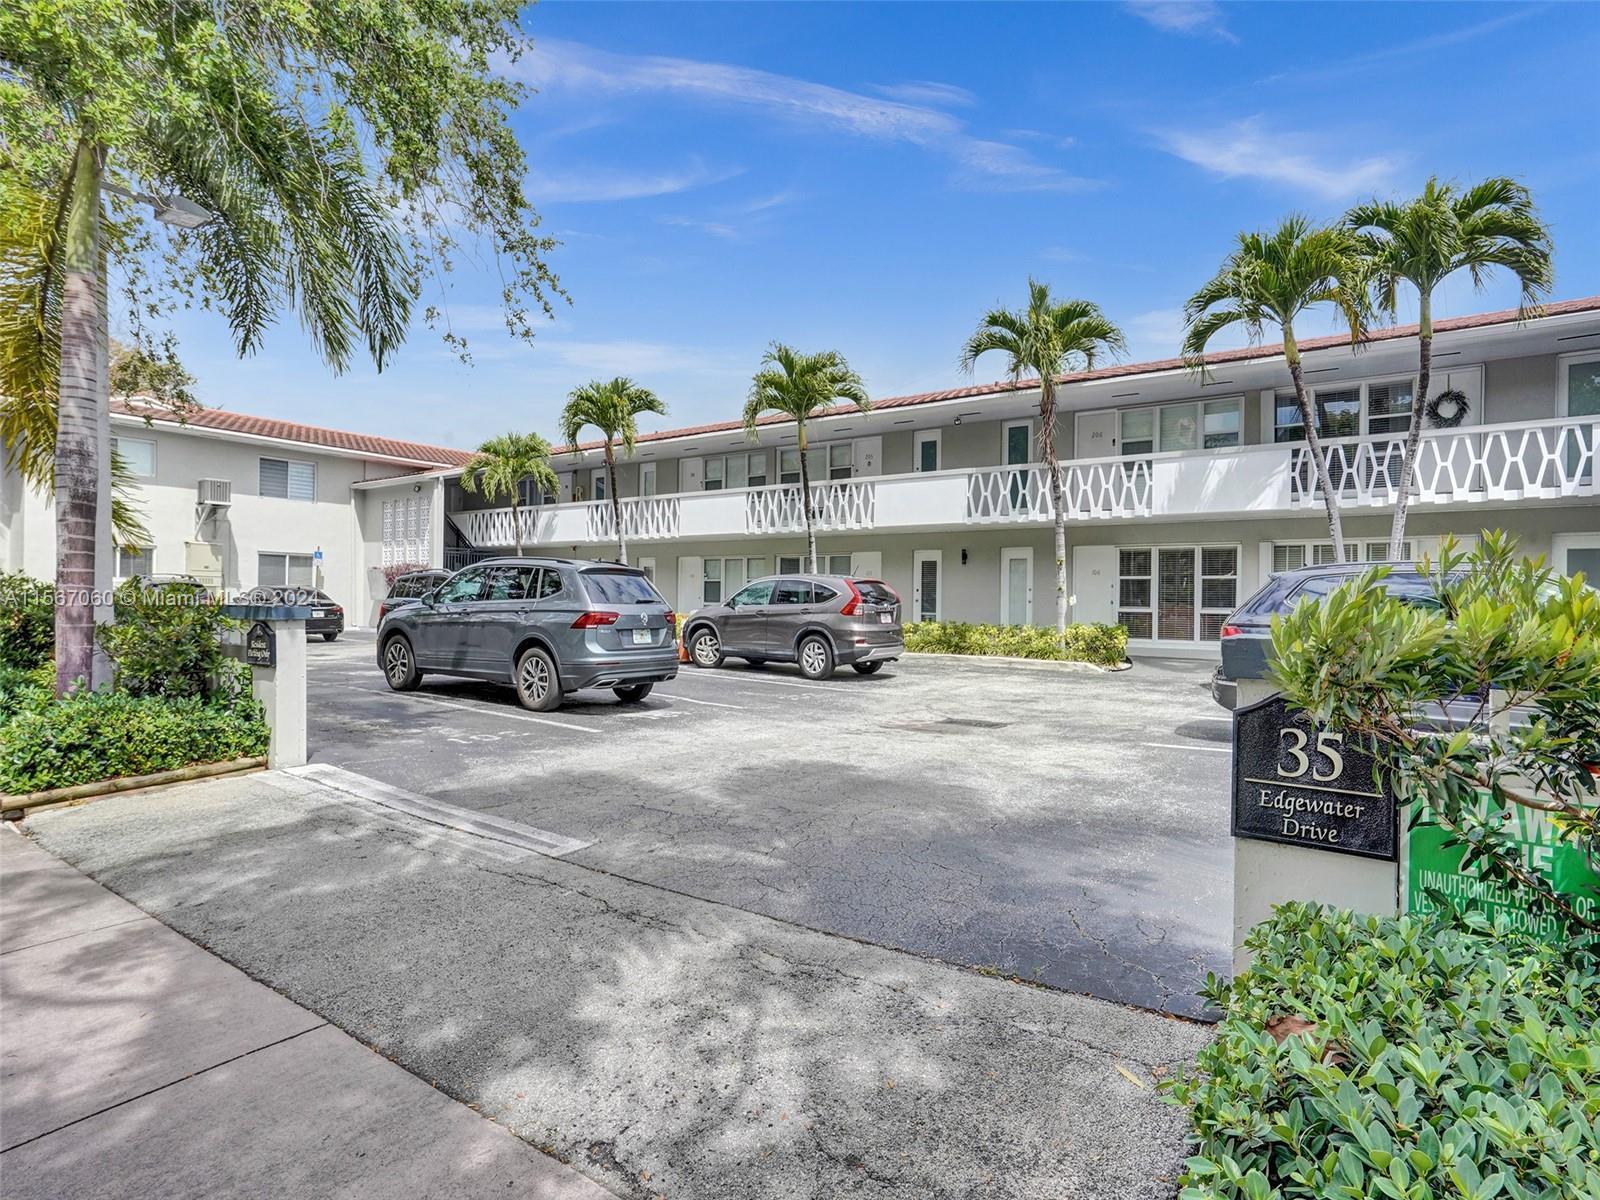 Spacious second floor 2-bed/1-bath condo on Edgewater Drive in Coral Gables. This unit boasts luxury